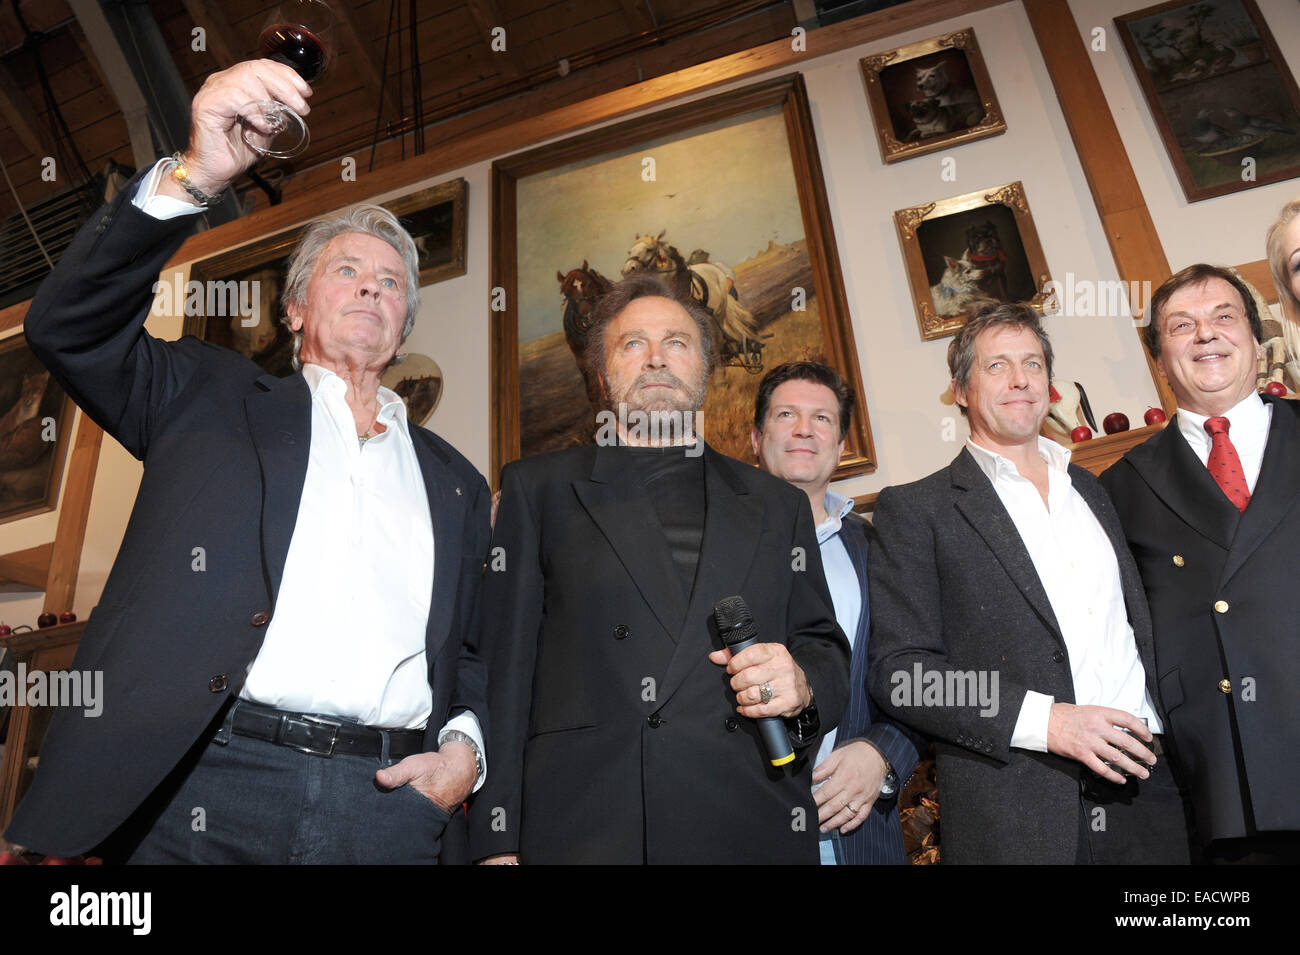 Salzburg, Austria. 11th Nov, 2014. Actors Alain Delon (L-R), Franco Nero, Francis Fulton-Smith, Hugh Grant, and Michael Aufhauser, owner of Gut Aiderbichl, at a traditional Christmas display at the Gut Aiderbichl animal sanctuary in Salzburg, Austria. On 06 December 2014 the show 'Advent in Aiderbichl' will be broadcast on the television station ORF 2 with a report on the Christmas display. The animal sanctuary is home to animals who come from sad situations. Credit:  dpa picture alliance/Alamy Live News Stock Photo